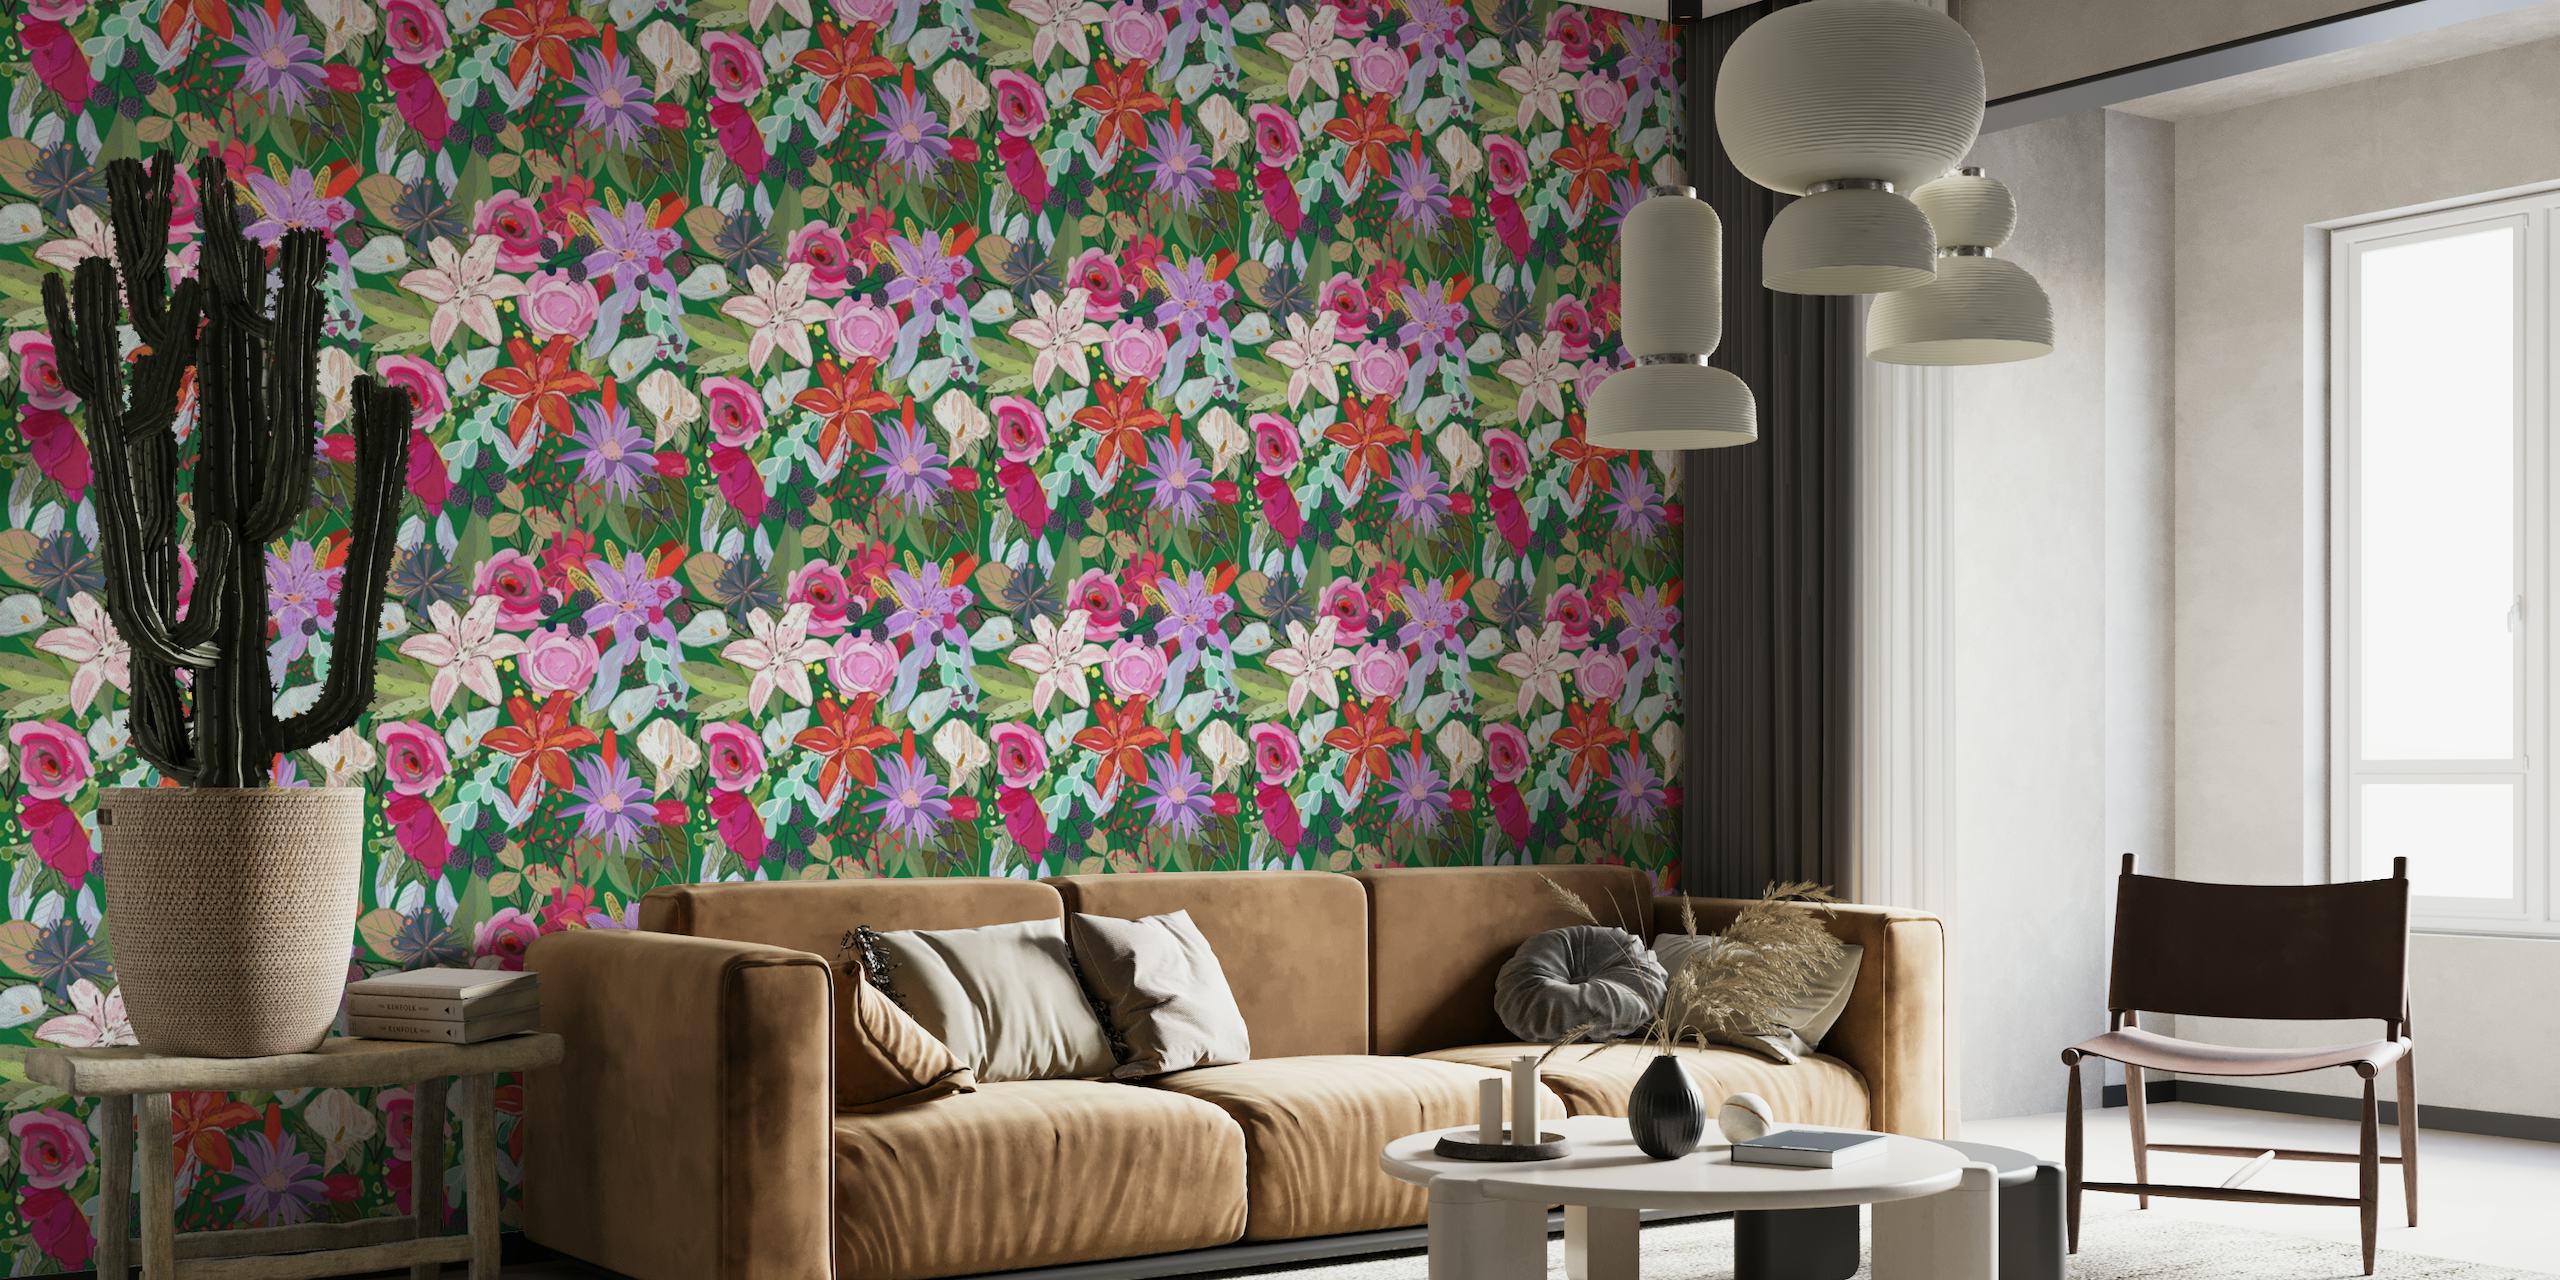 Lily and colorful flowers pattern wallpaper